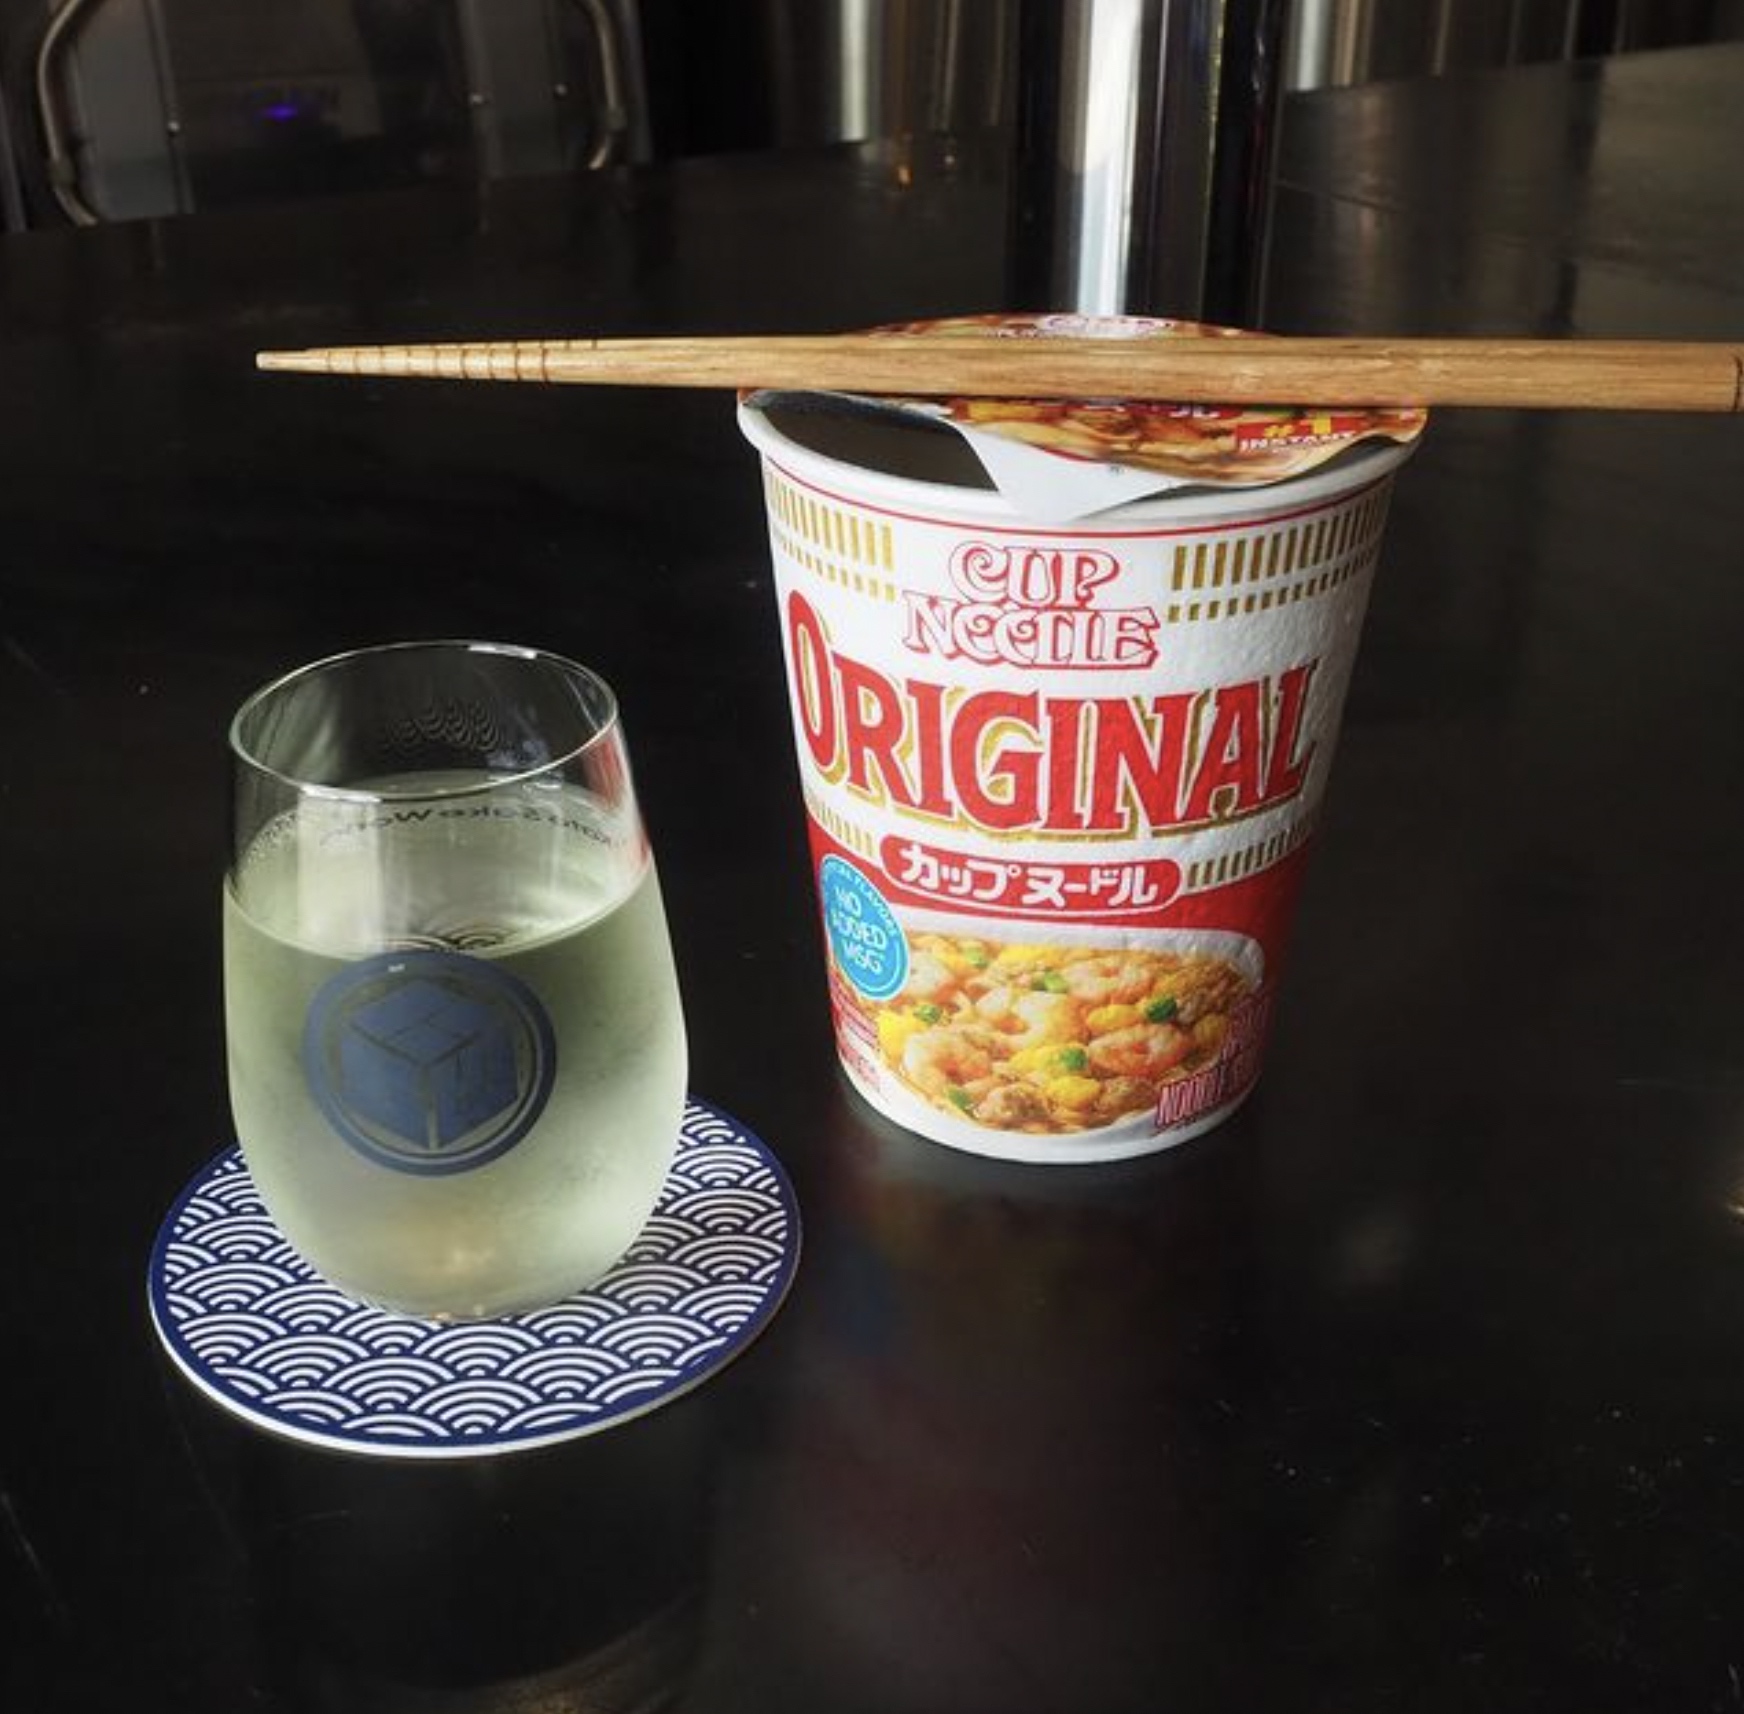 Cup noodles and sake